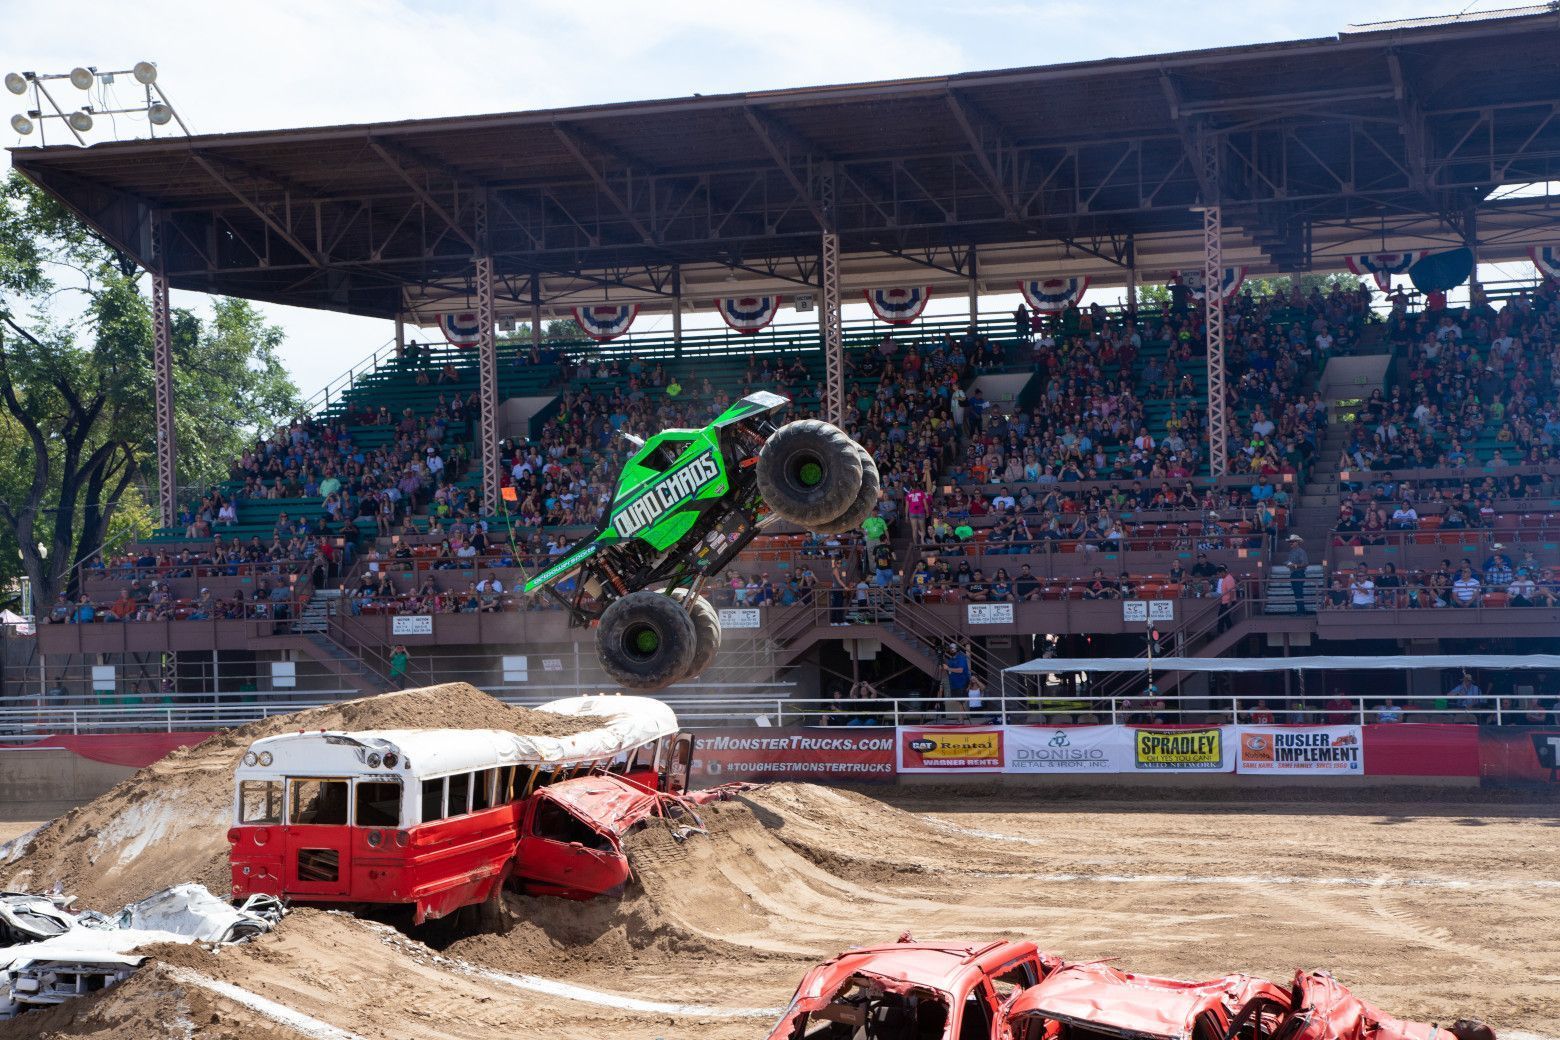 Monster Truck Competitions at the Colorado State Fair is a very popular attraction